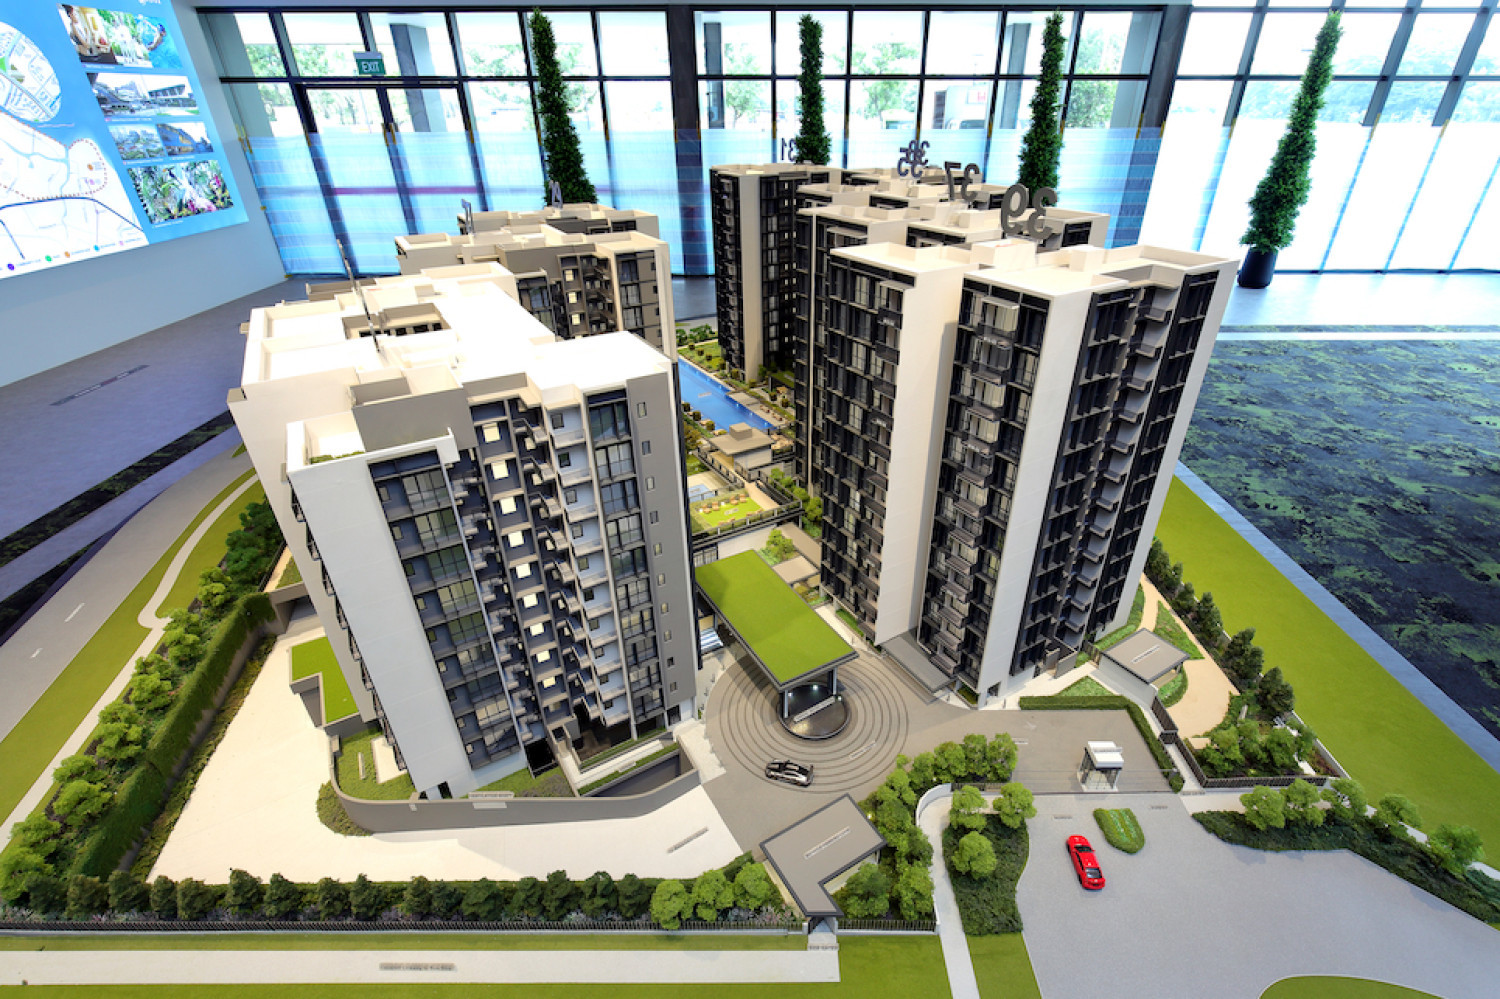 Provence Residence sells 53% of total units at launch - Property News